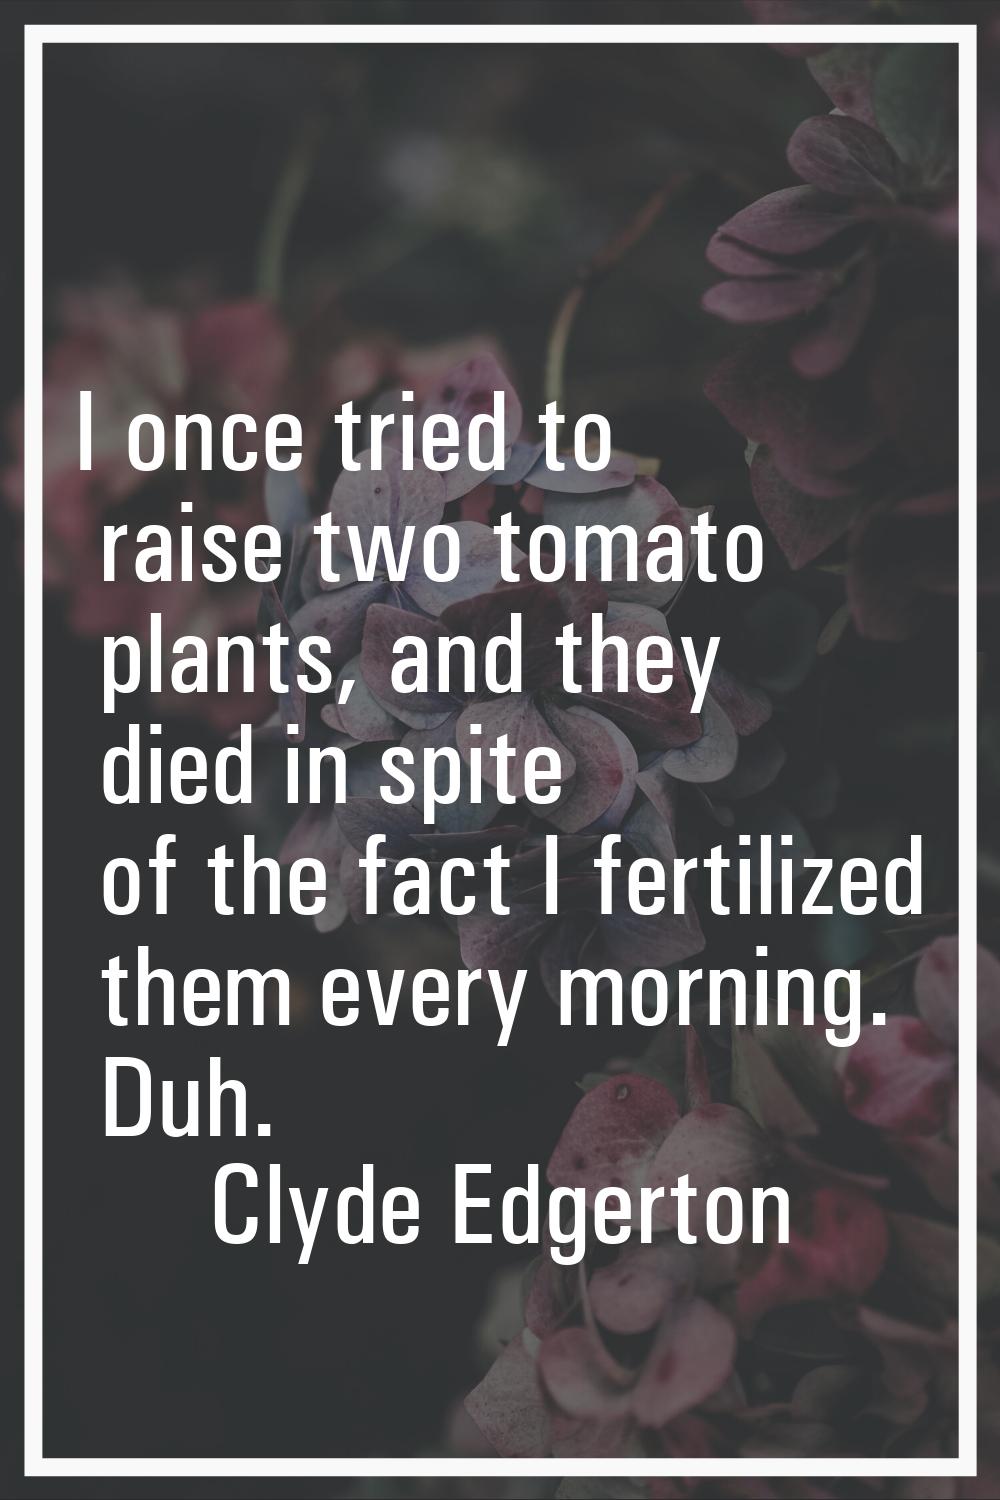 I once tried to raise two tomato plants, and they died in spite of the fact I fertilized them every